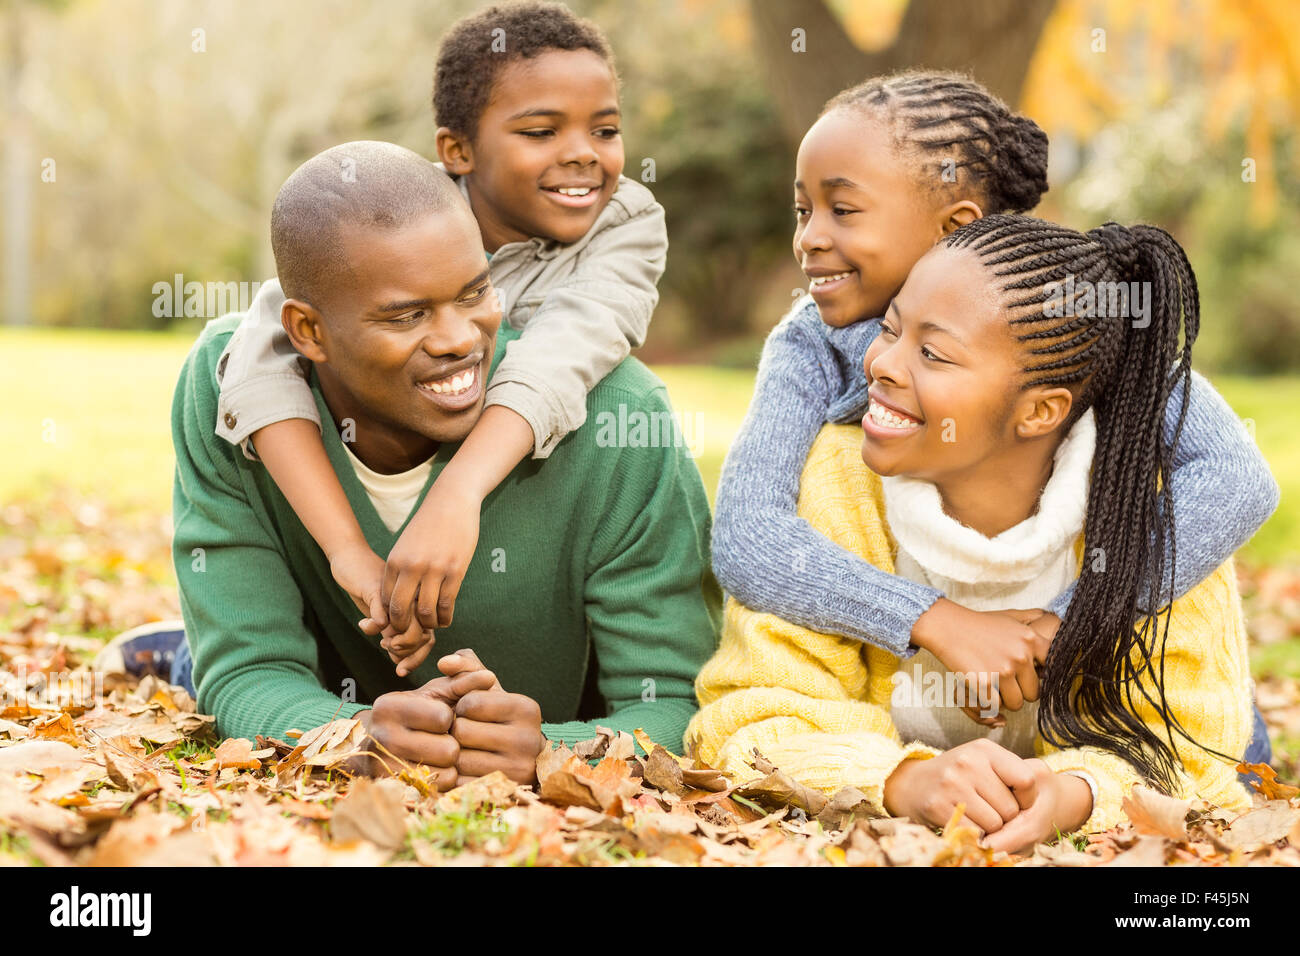 Portrait of a young family lying in leaves Stock Photo